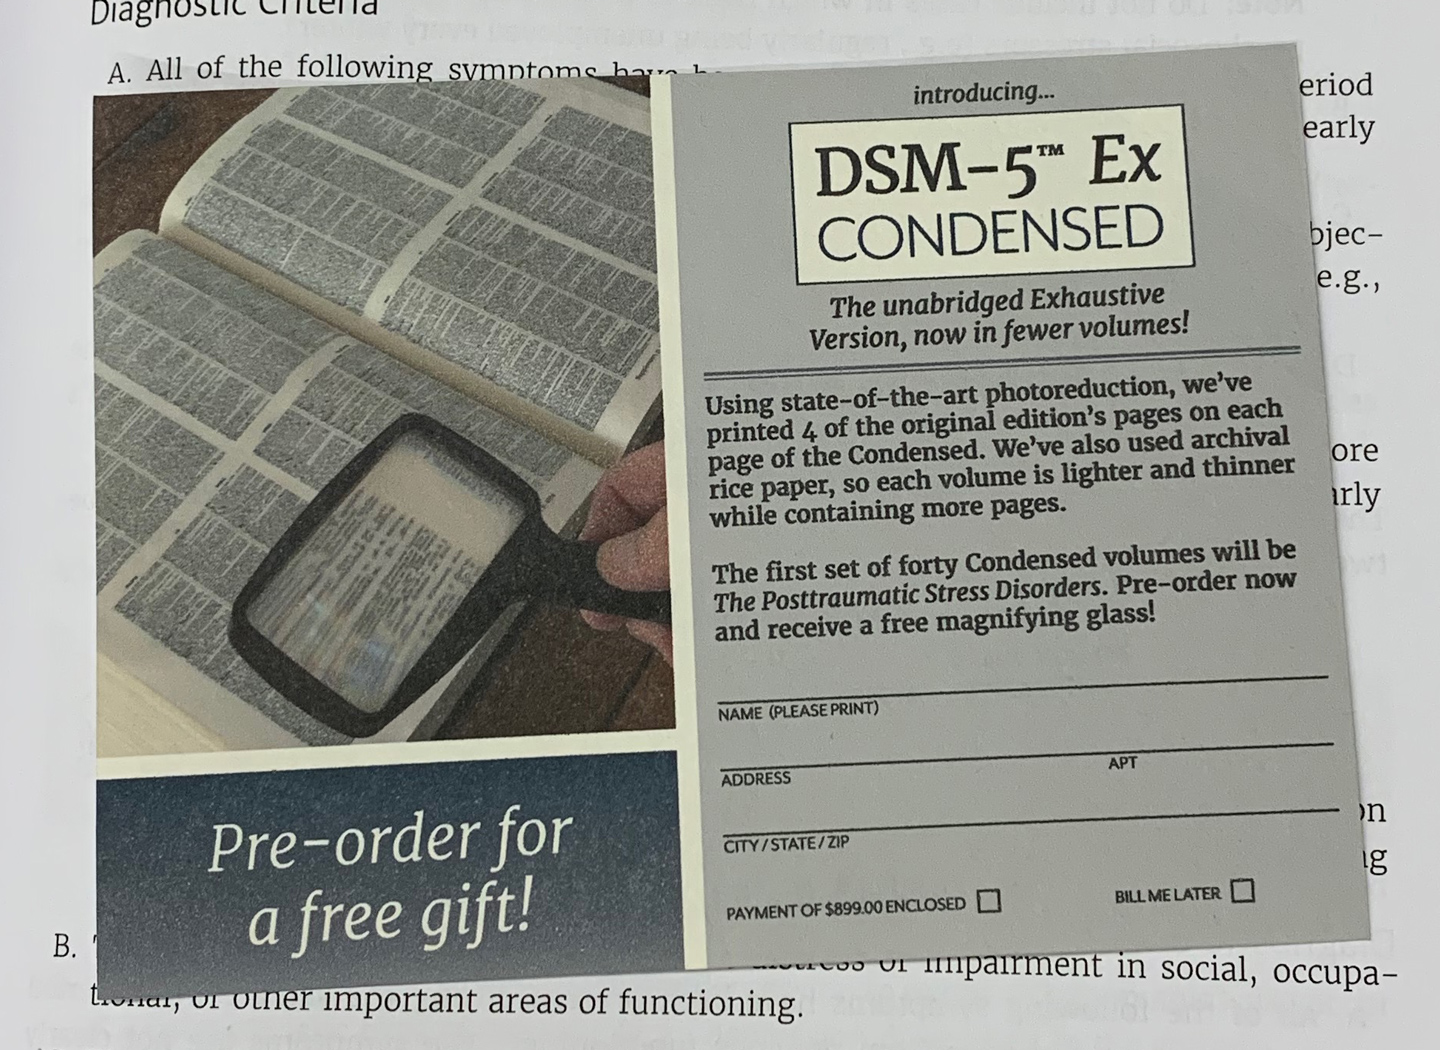 Mock mail-in flyer for the DSM-5 Ex Condensed